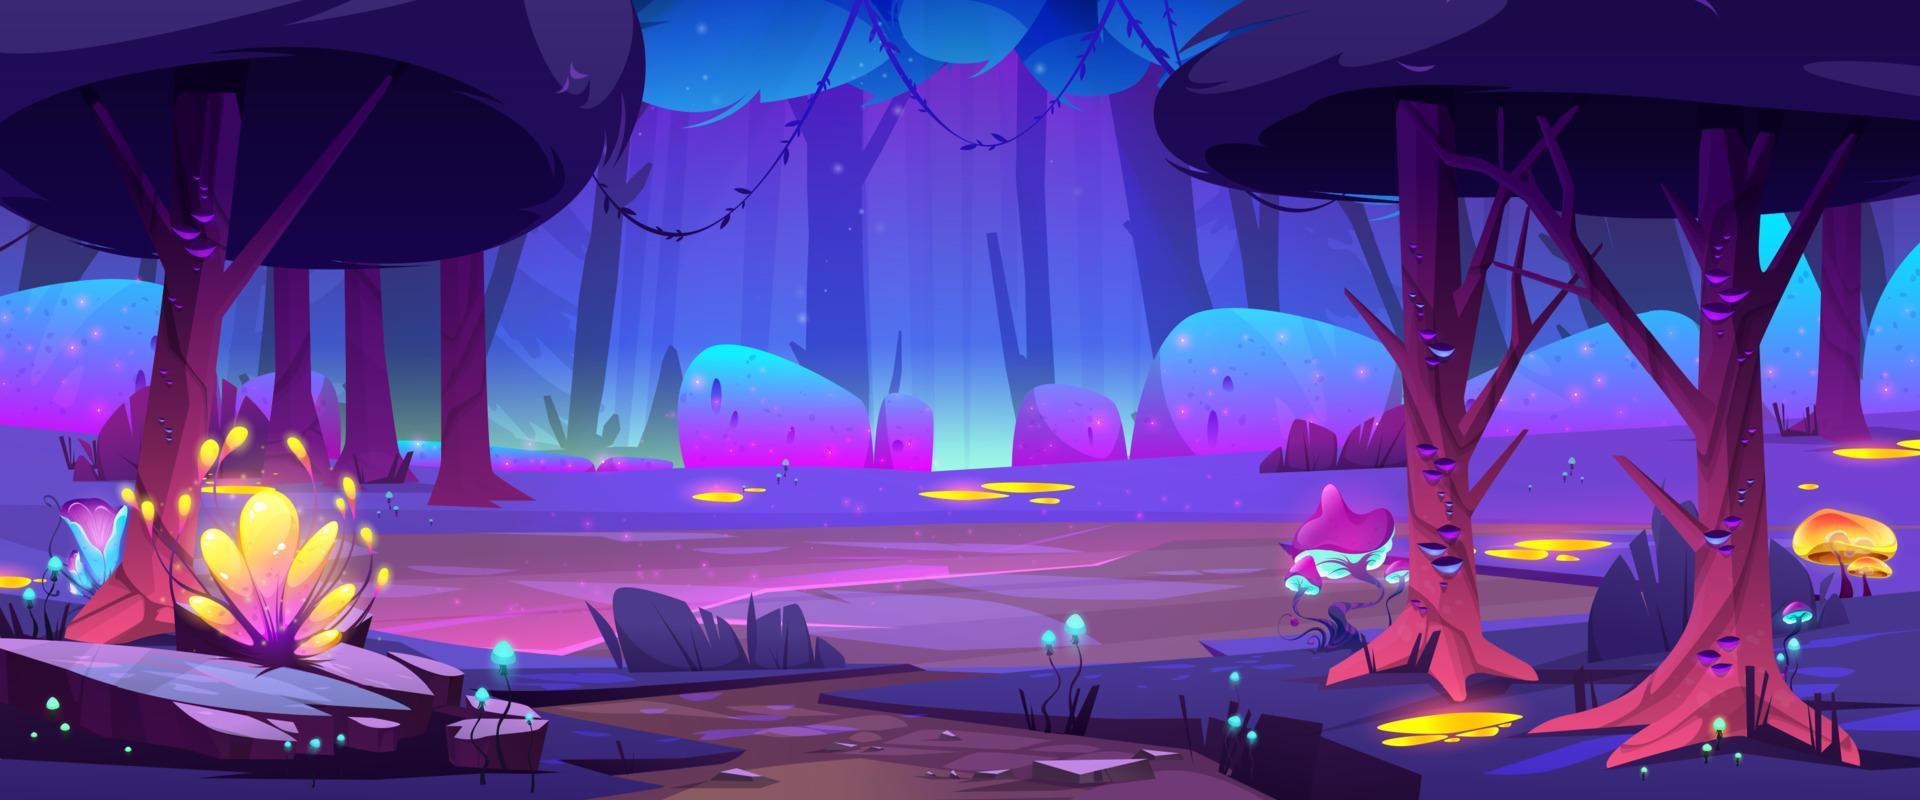 Magic forest landscape at night vector